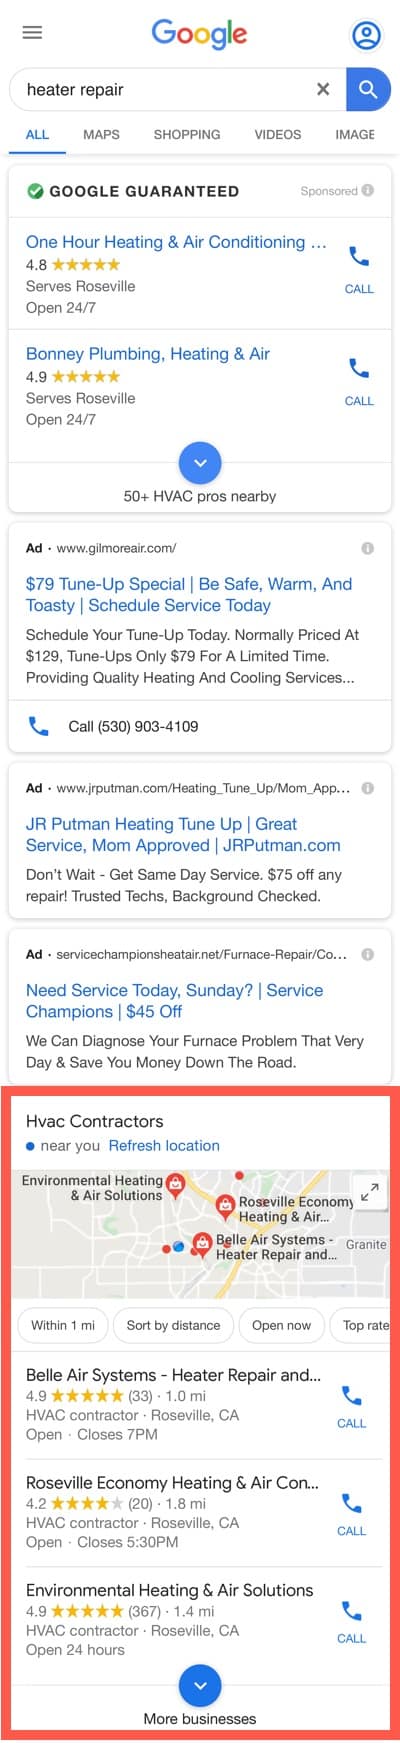 Google mobile search for heater repair.